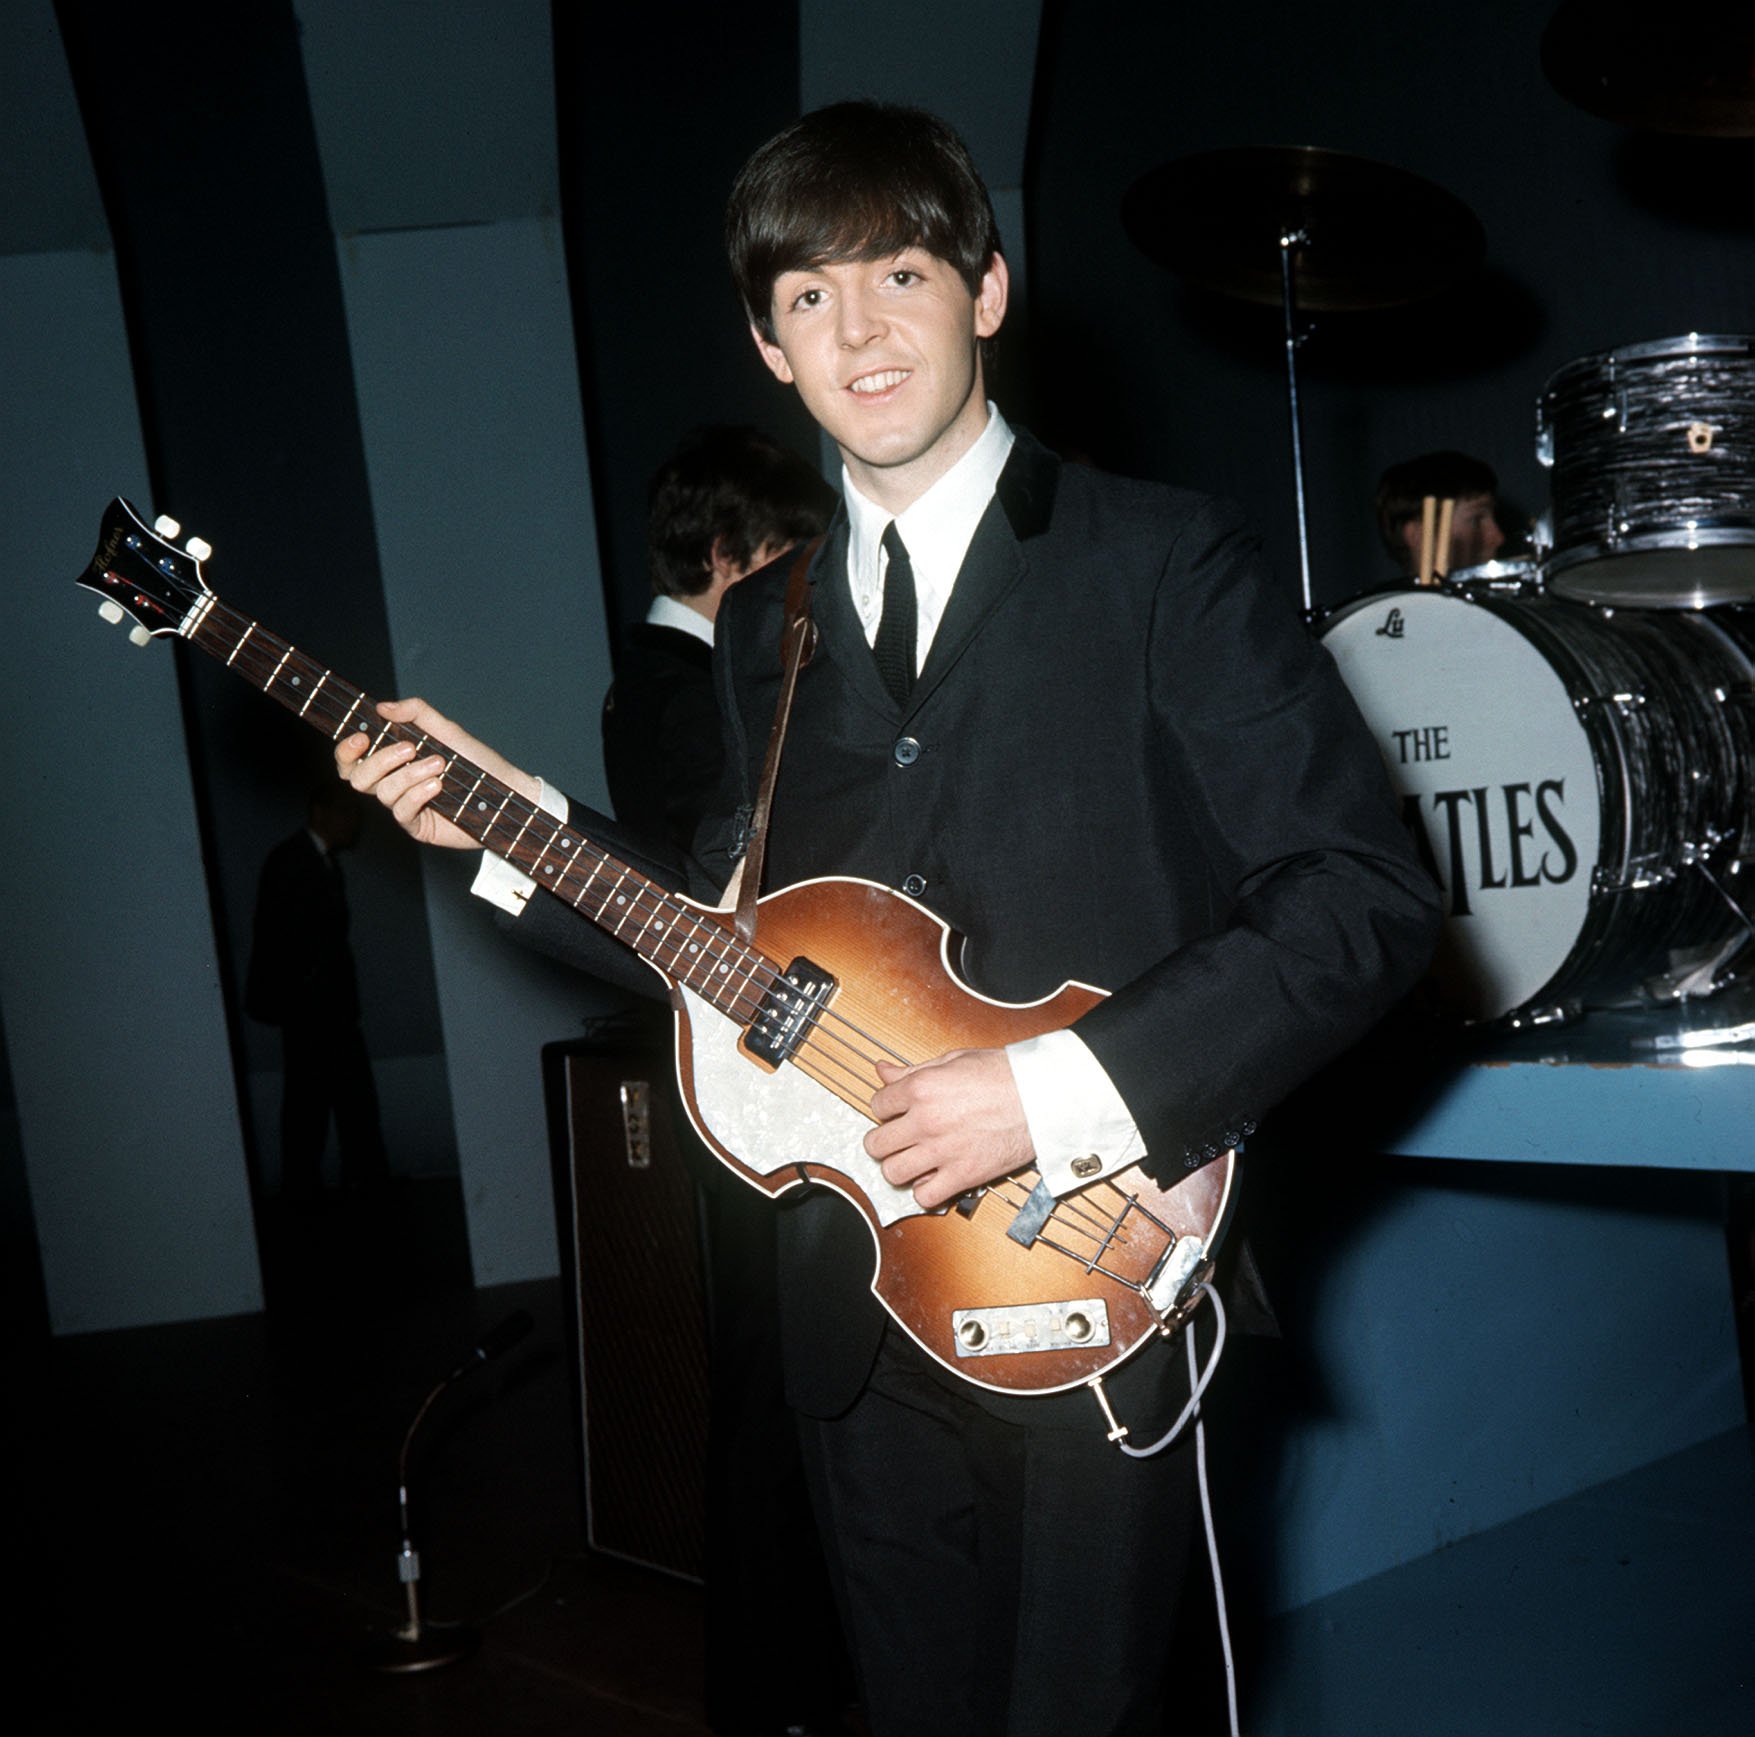 The Beatles' Paul McCartney playing songs on a guitar